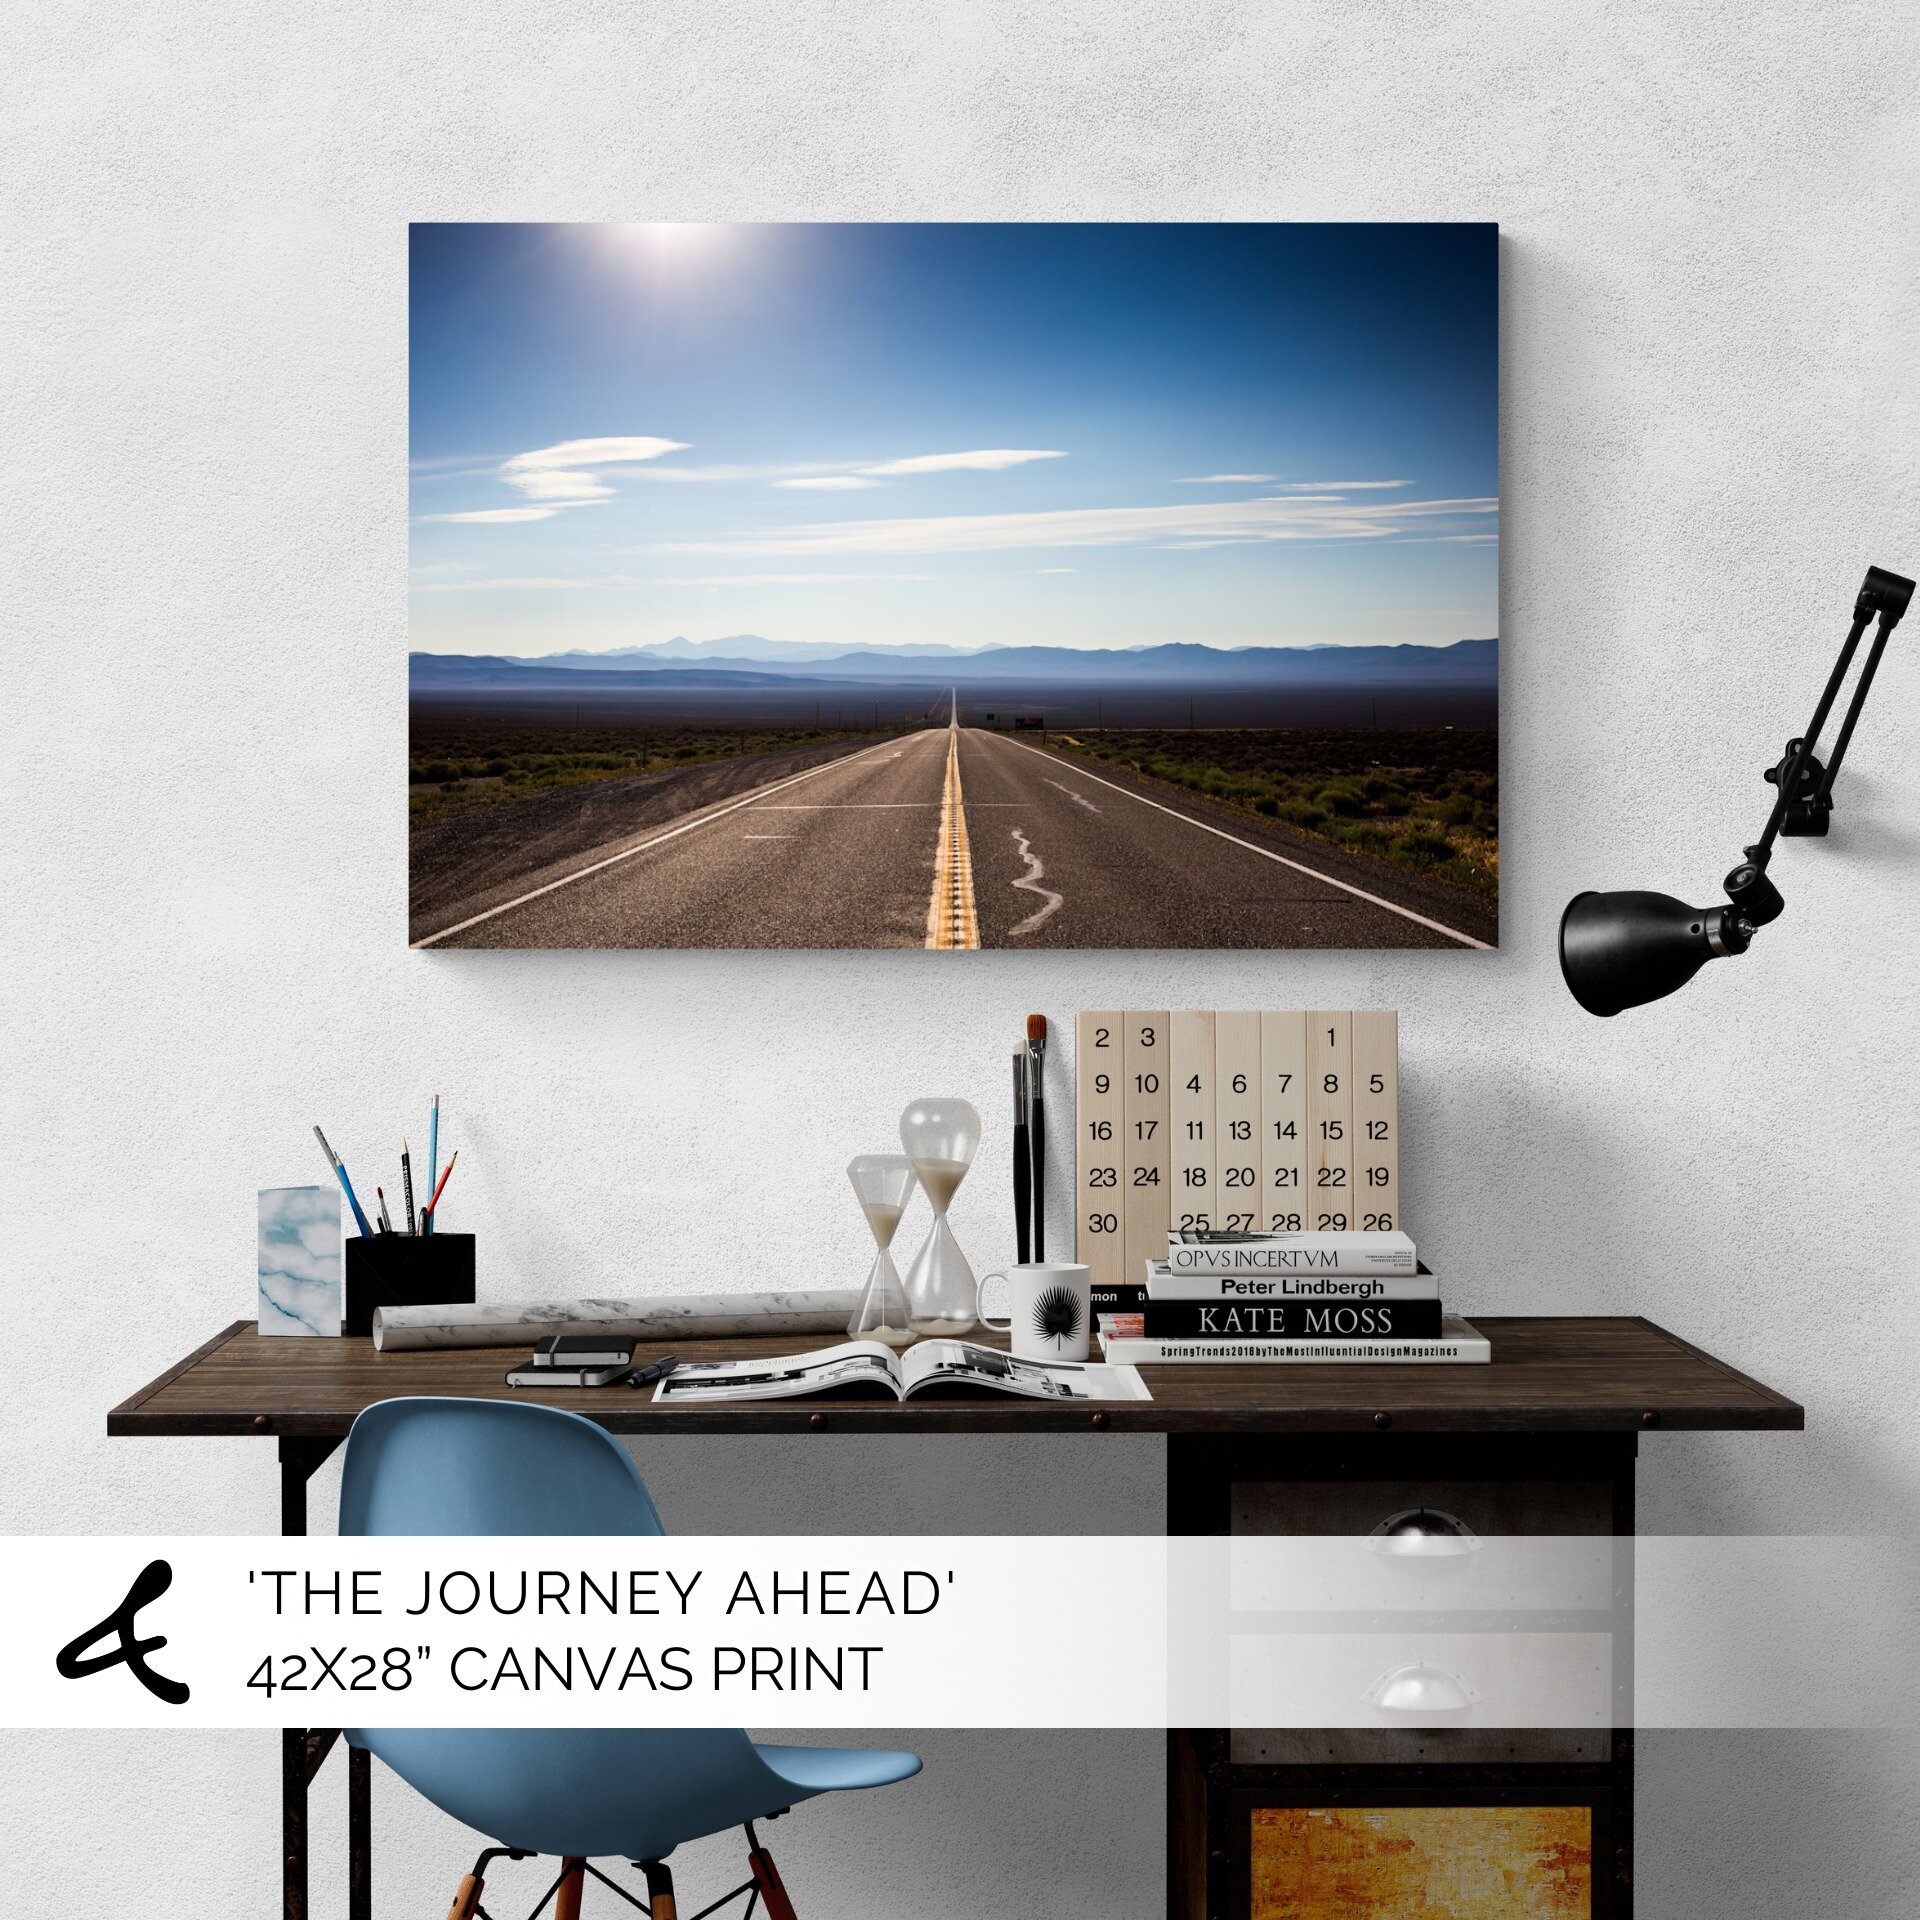 This photograph captures the powerful symbolism of an open road. Discover new beginnings, vibrant adventures, and the wild unknown!

This breathtaking mix of anticipation and excitement will inspire you to take on all of life's challenges. Browse my 